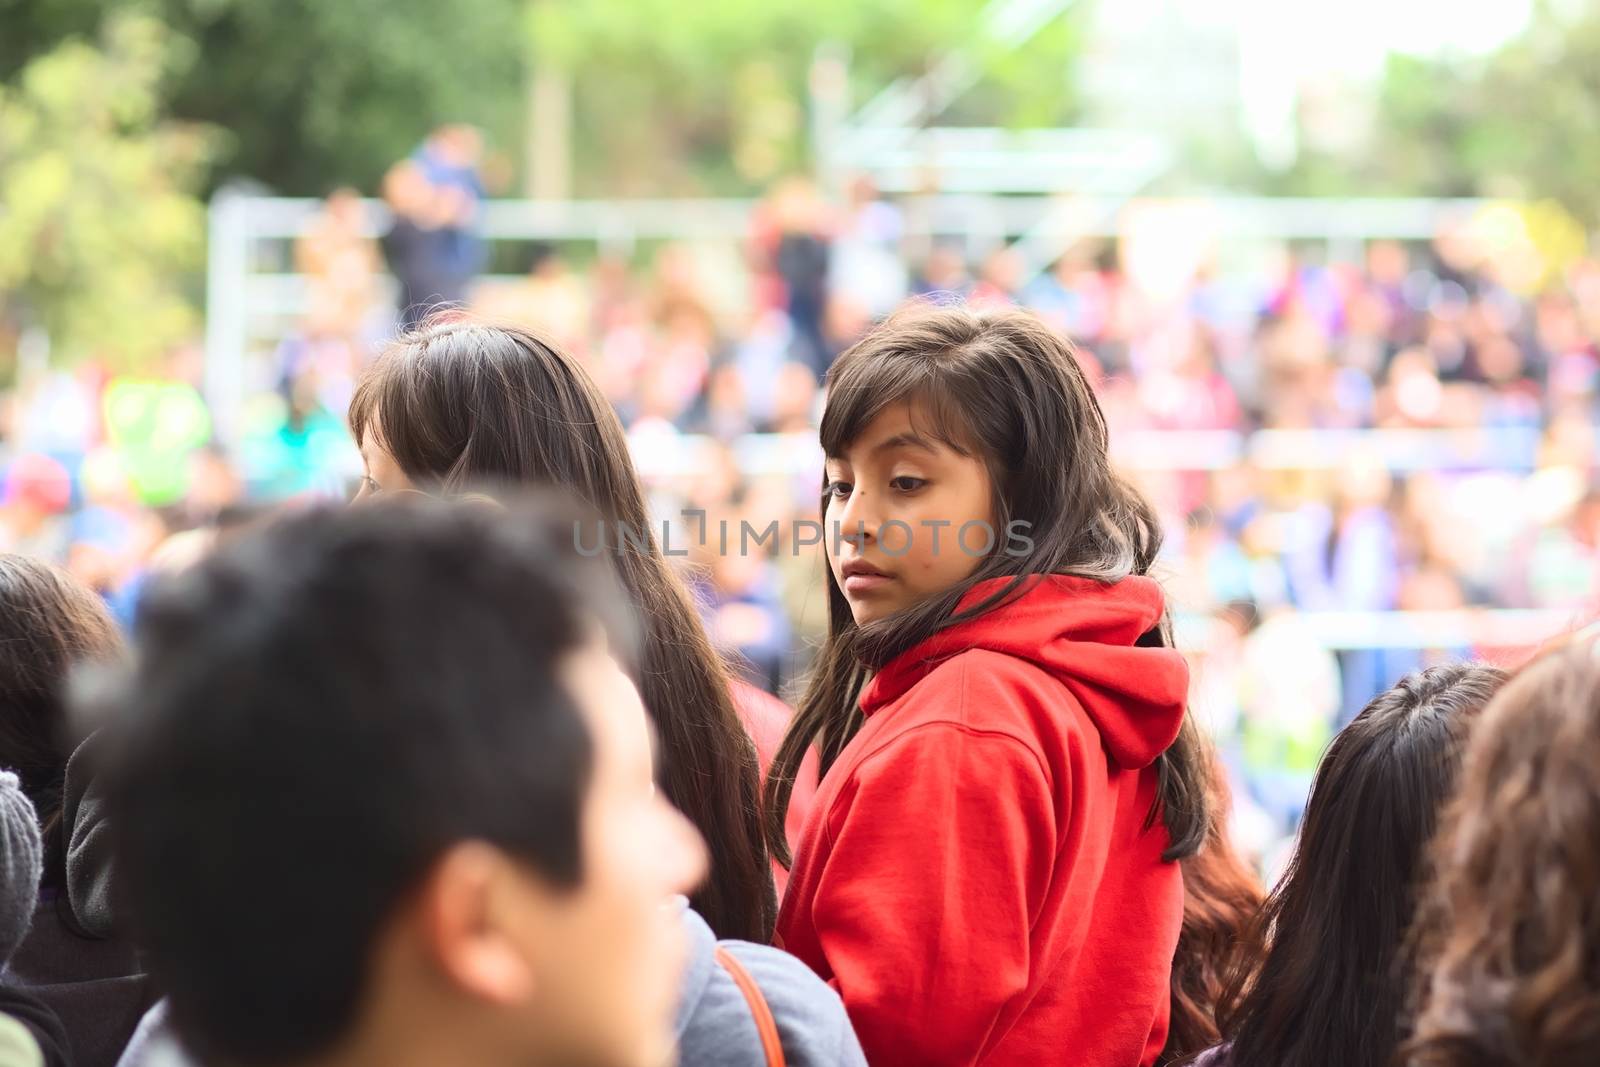 LIMA, PERU - JULY 21, 2013: Unidentified girl on the Wong Parade in Miraflores on July 21, 2013 in Lima, Peru. The Parade (Gran Corso de Wong) is a traditional parade to celebrate the Peruvian national holiday which is on July 28-29. 